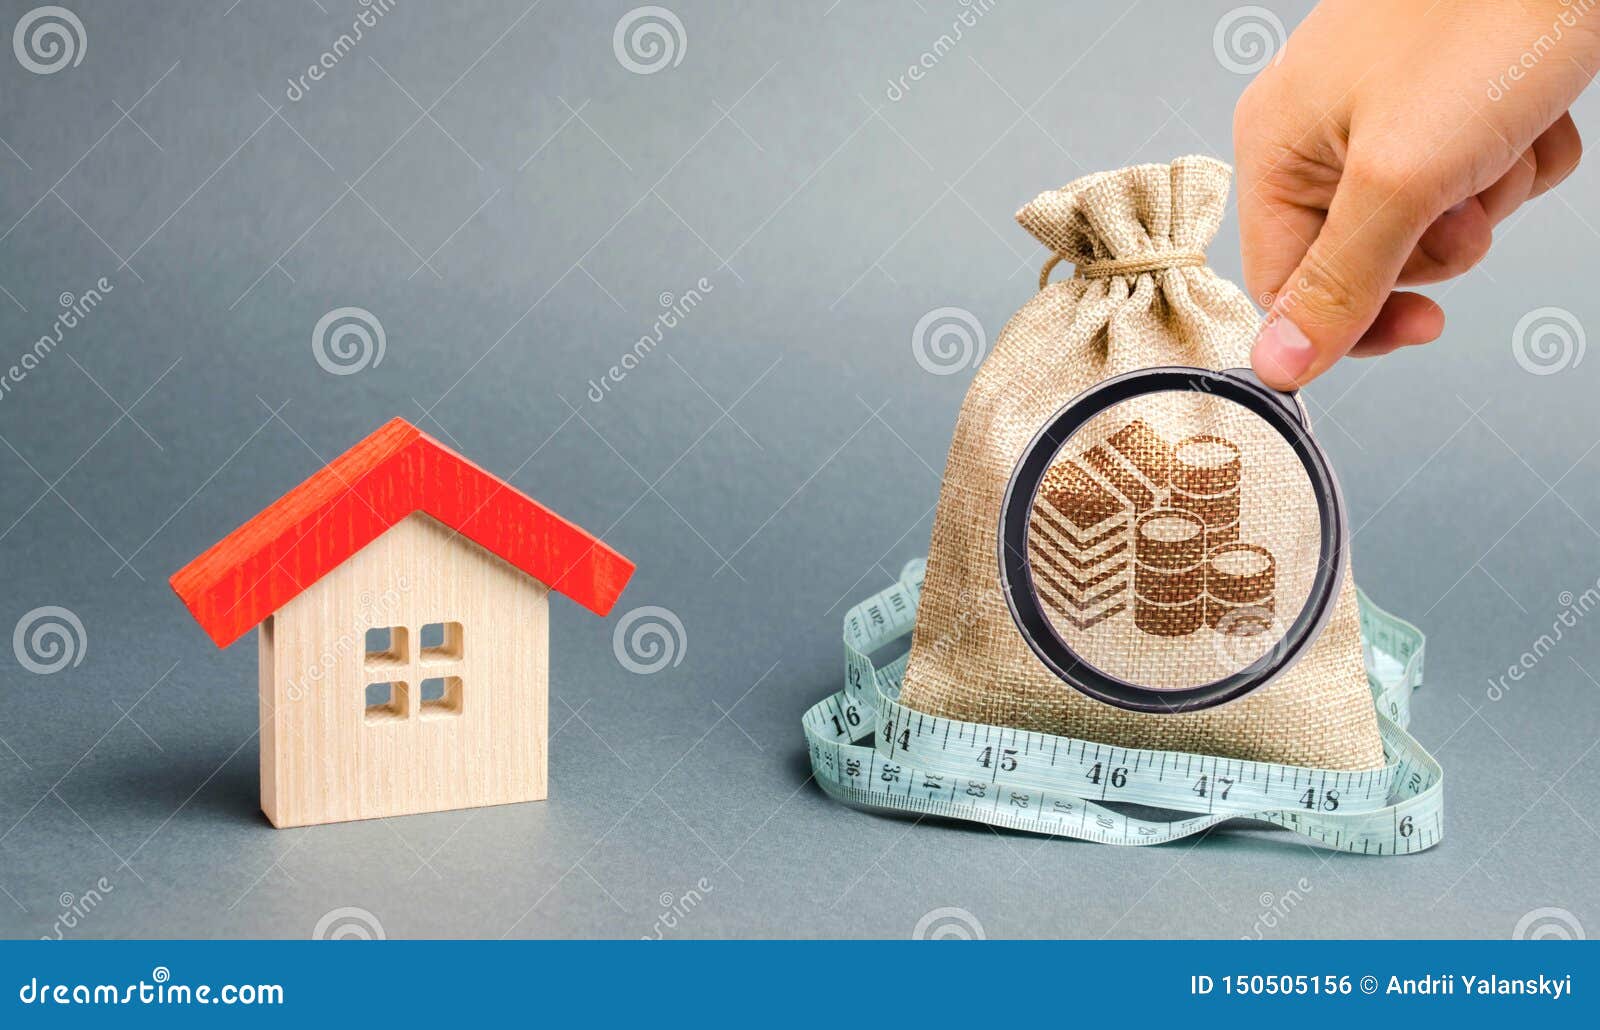 bag with money and tape measure with a wooden house. the concept of a limited real estate budget. low subsidies. lack of